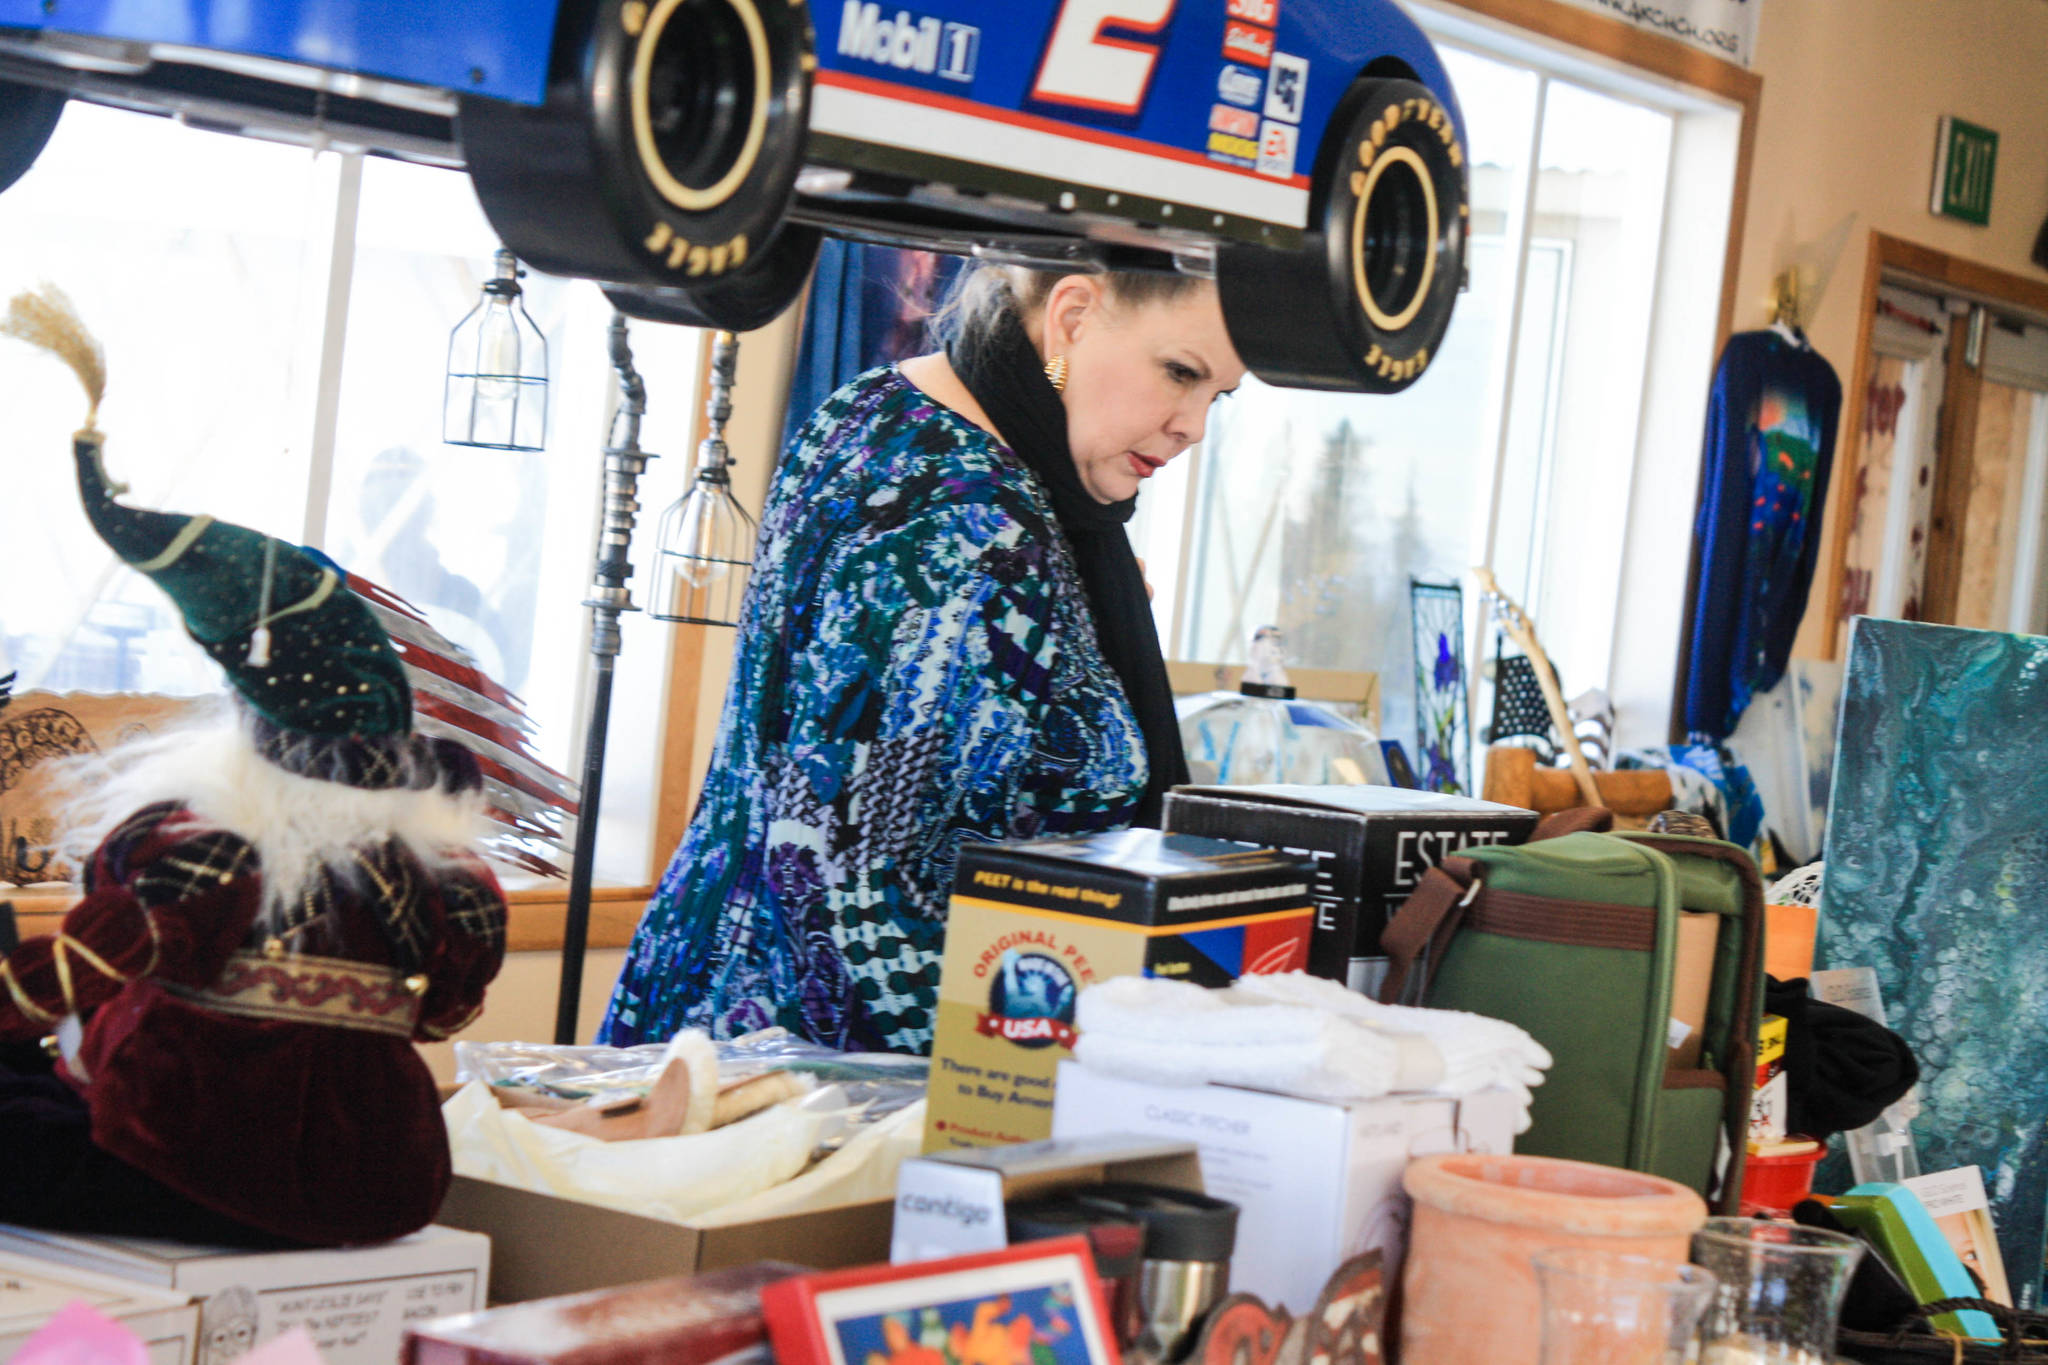 A woman checks out items offered for auction during the WOW fundraiser for cancer patients held on Saturday, Feb. 24, 2018 at Freddie’s Roadhouse in the Caribou Hills near Ninilchik, Alaska. (Photo by Erin Thompson/Peninsula Clarion)